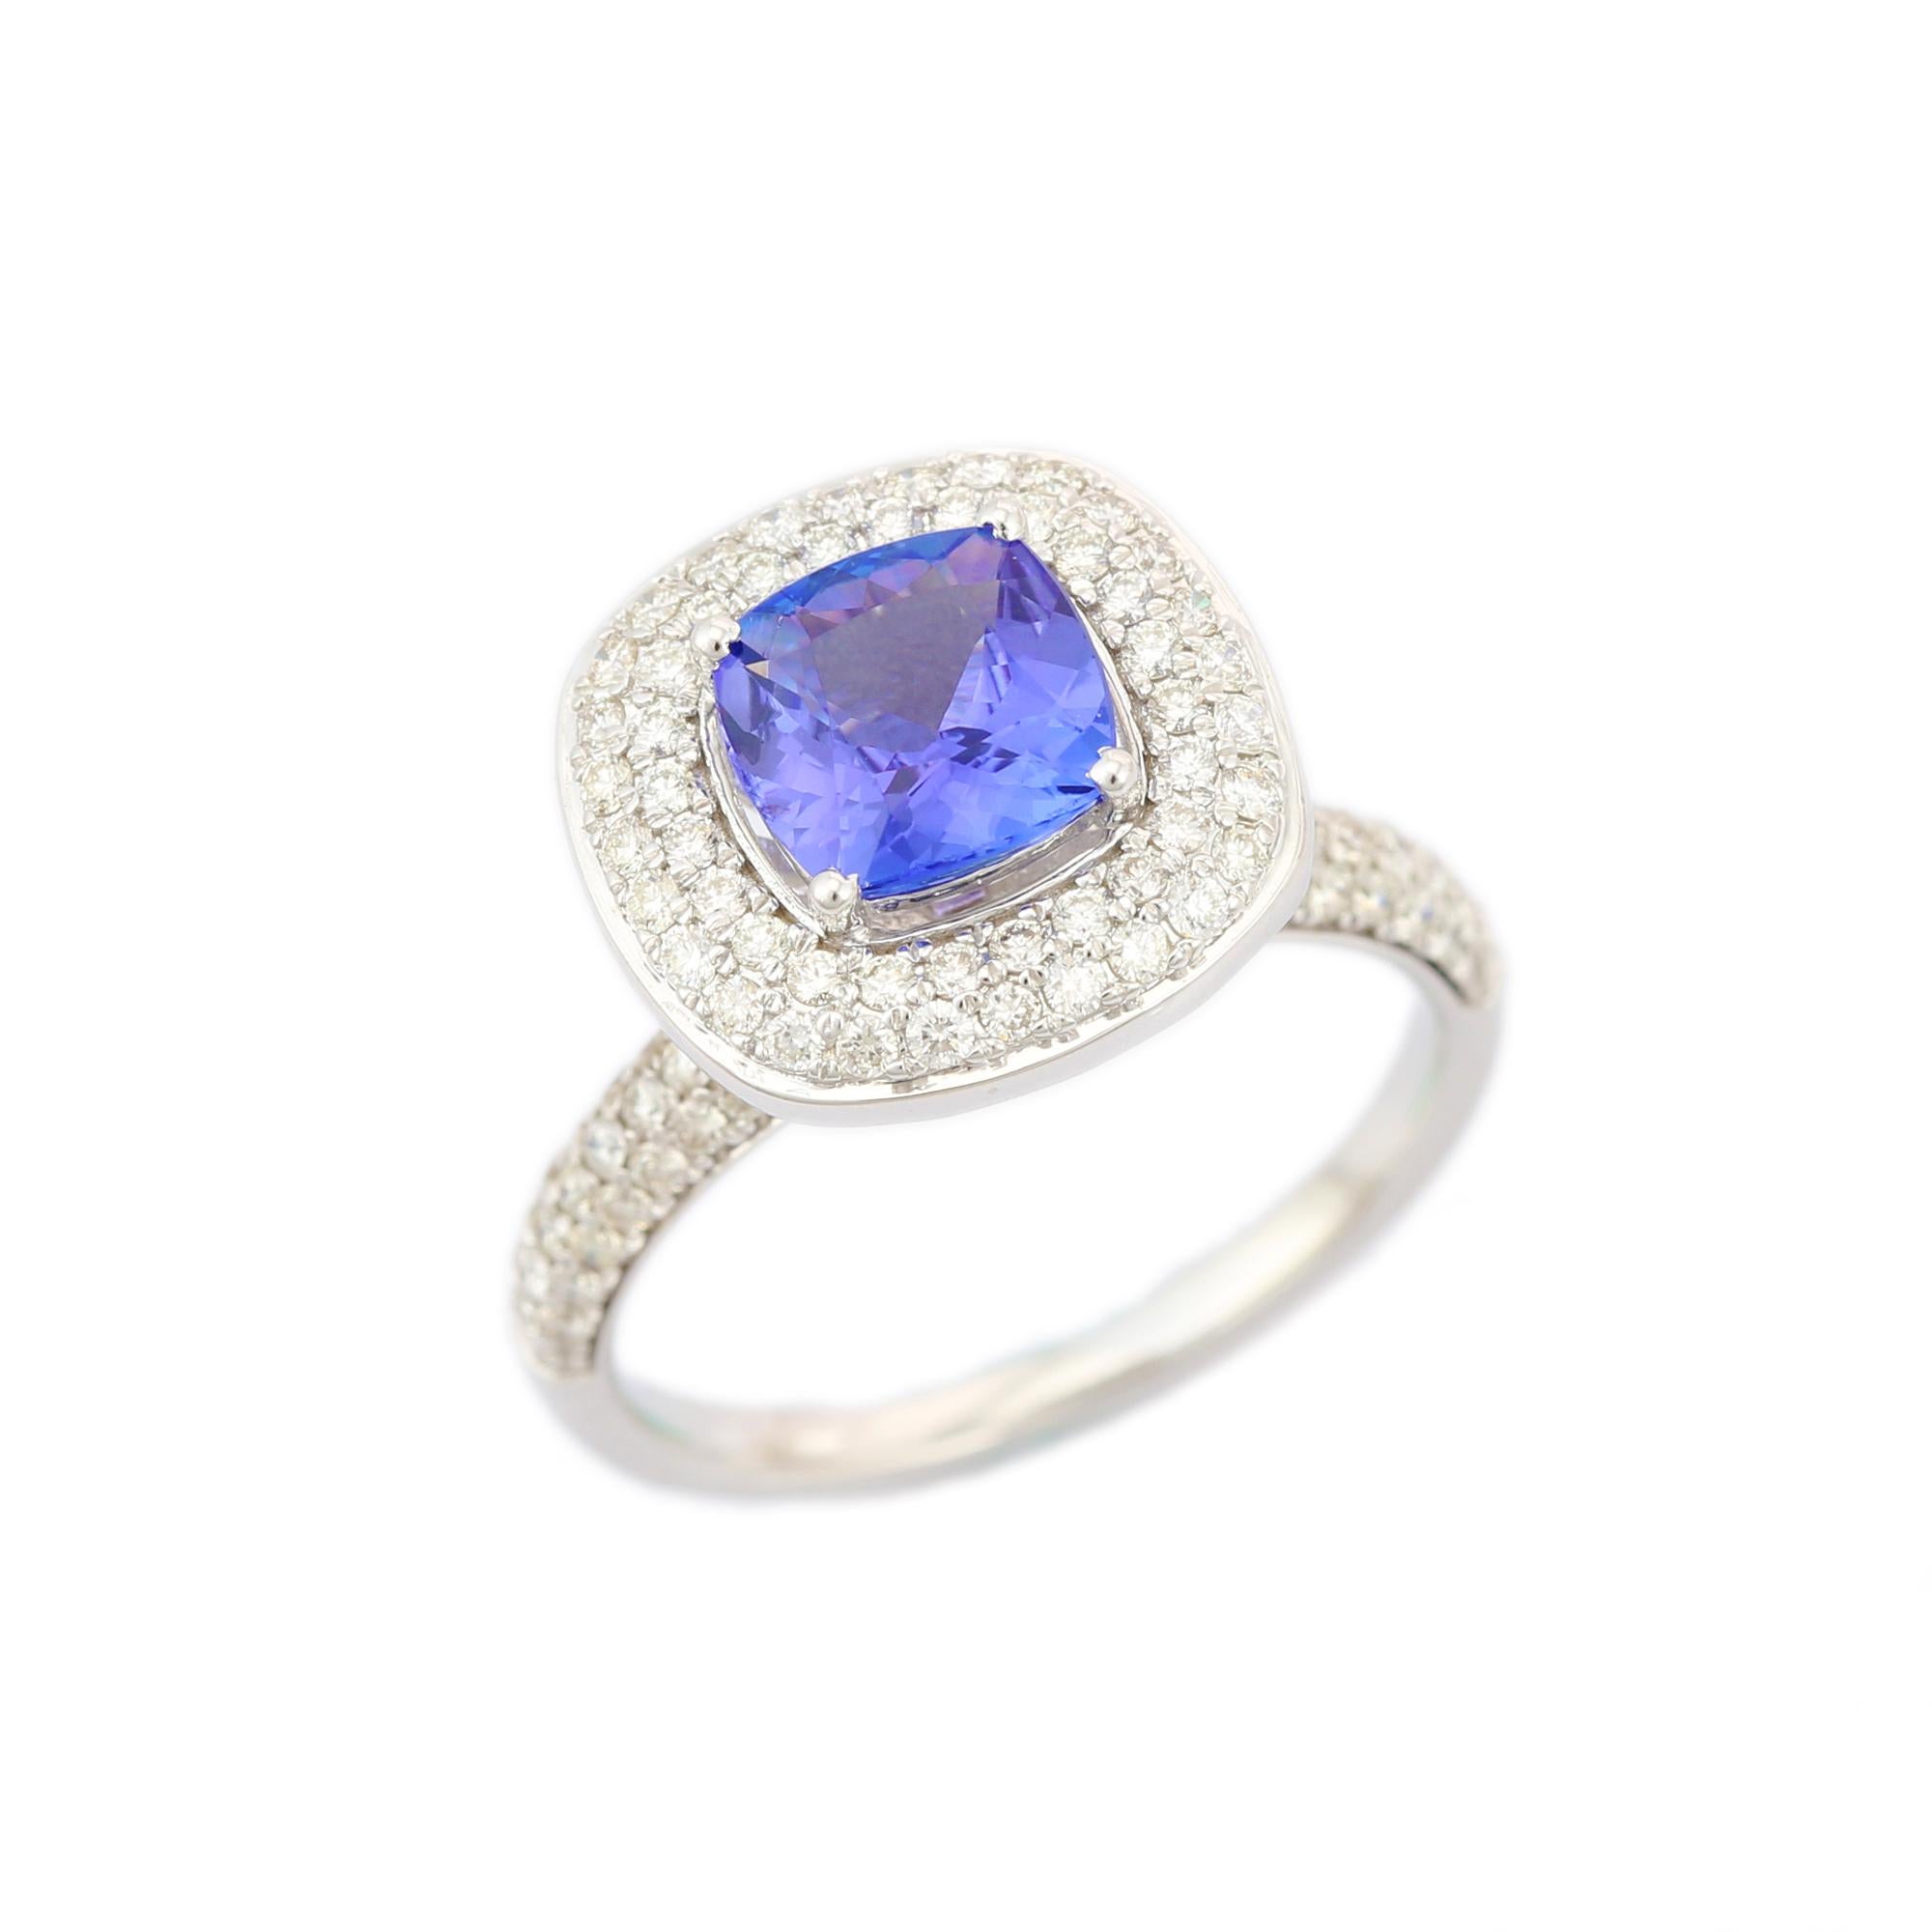 For Sale:  Tanzanite Gemstone Engagement Ring with Diamonds in 18K White Gold 6